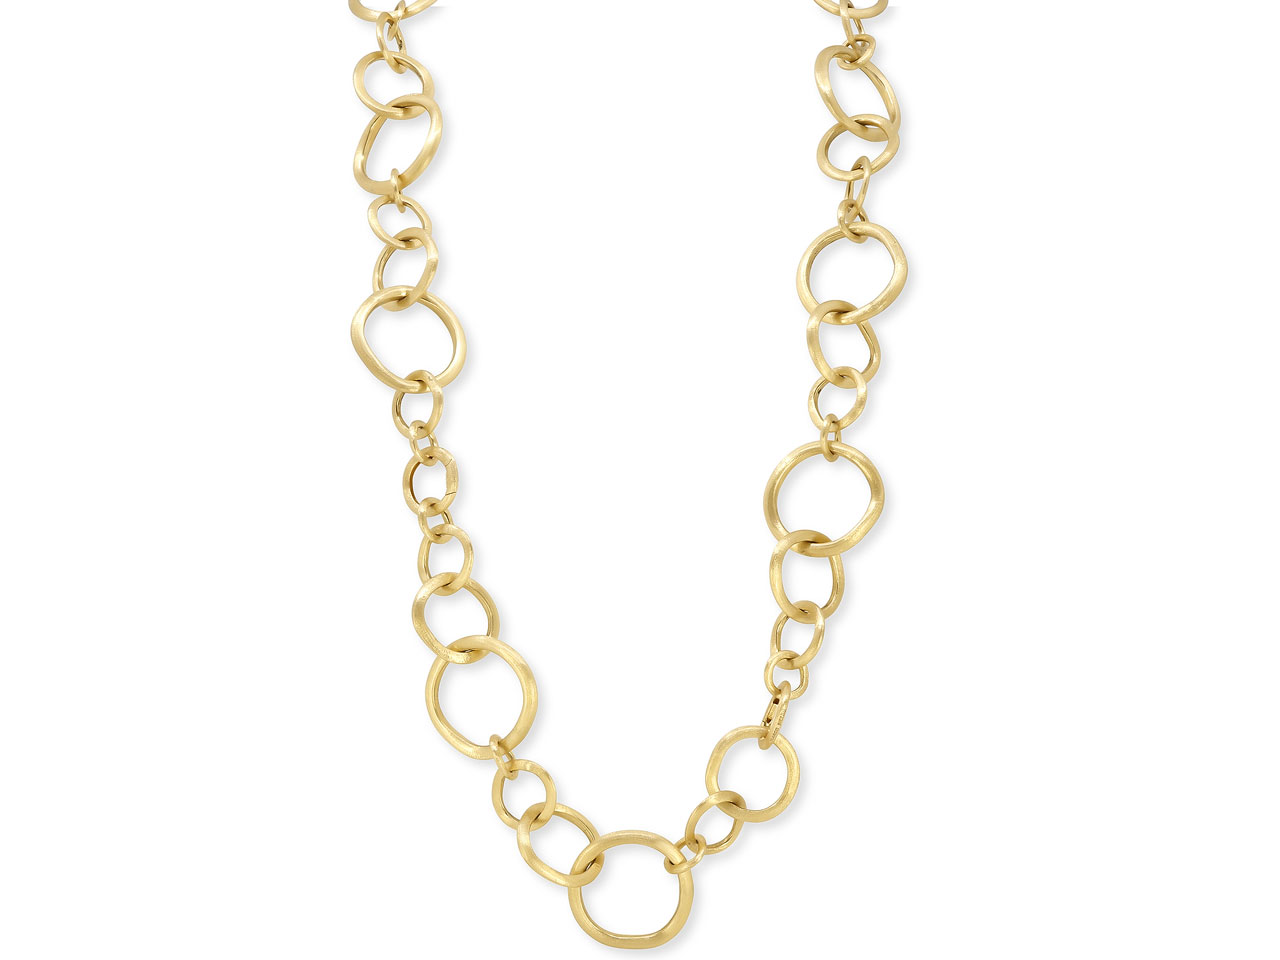 Marco Bicego 'Jaipu' Convertible Necklace in 18K Gold